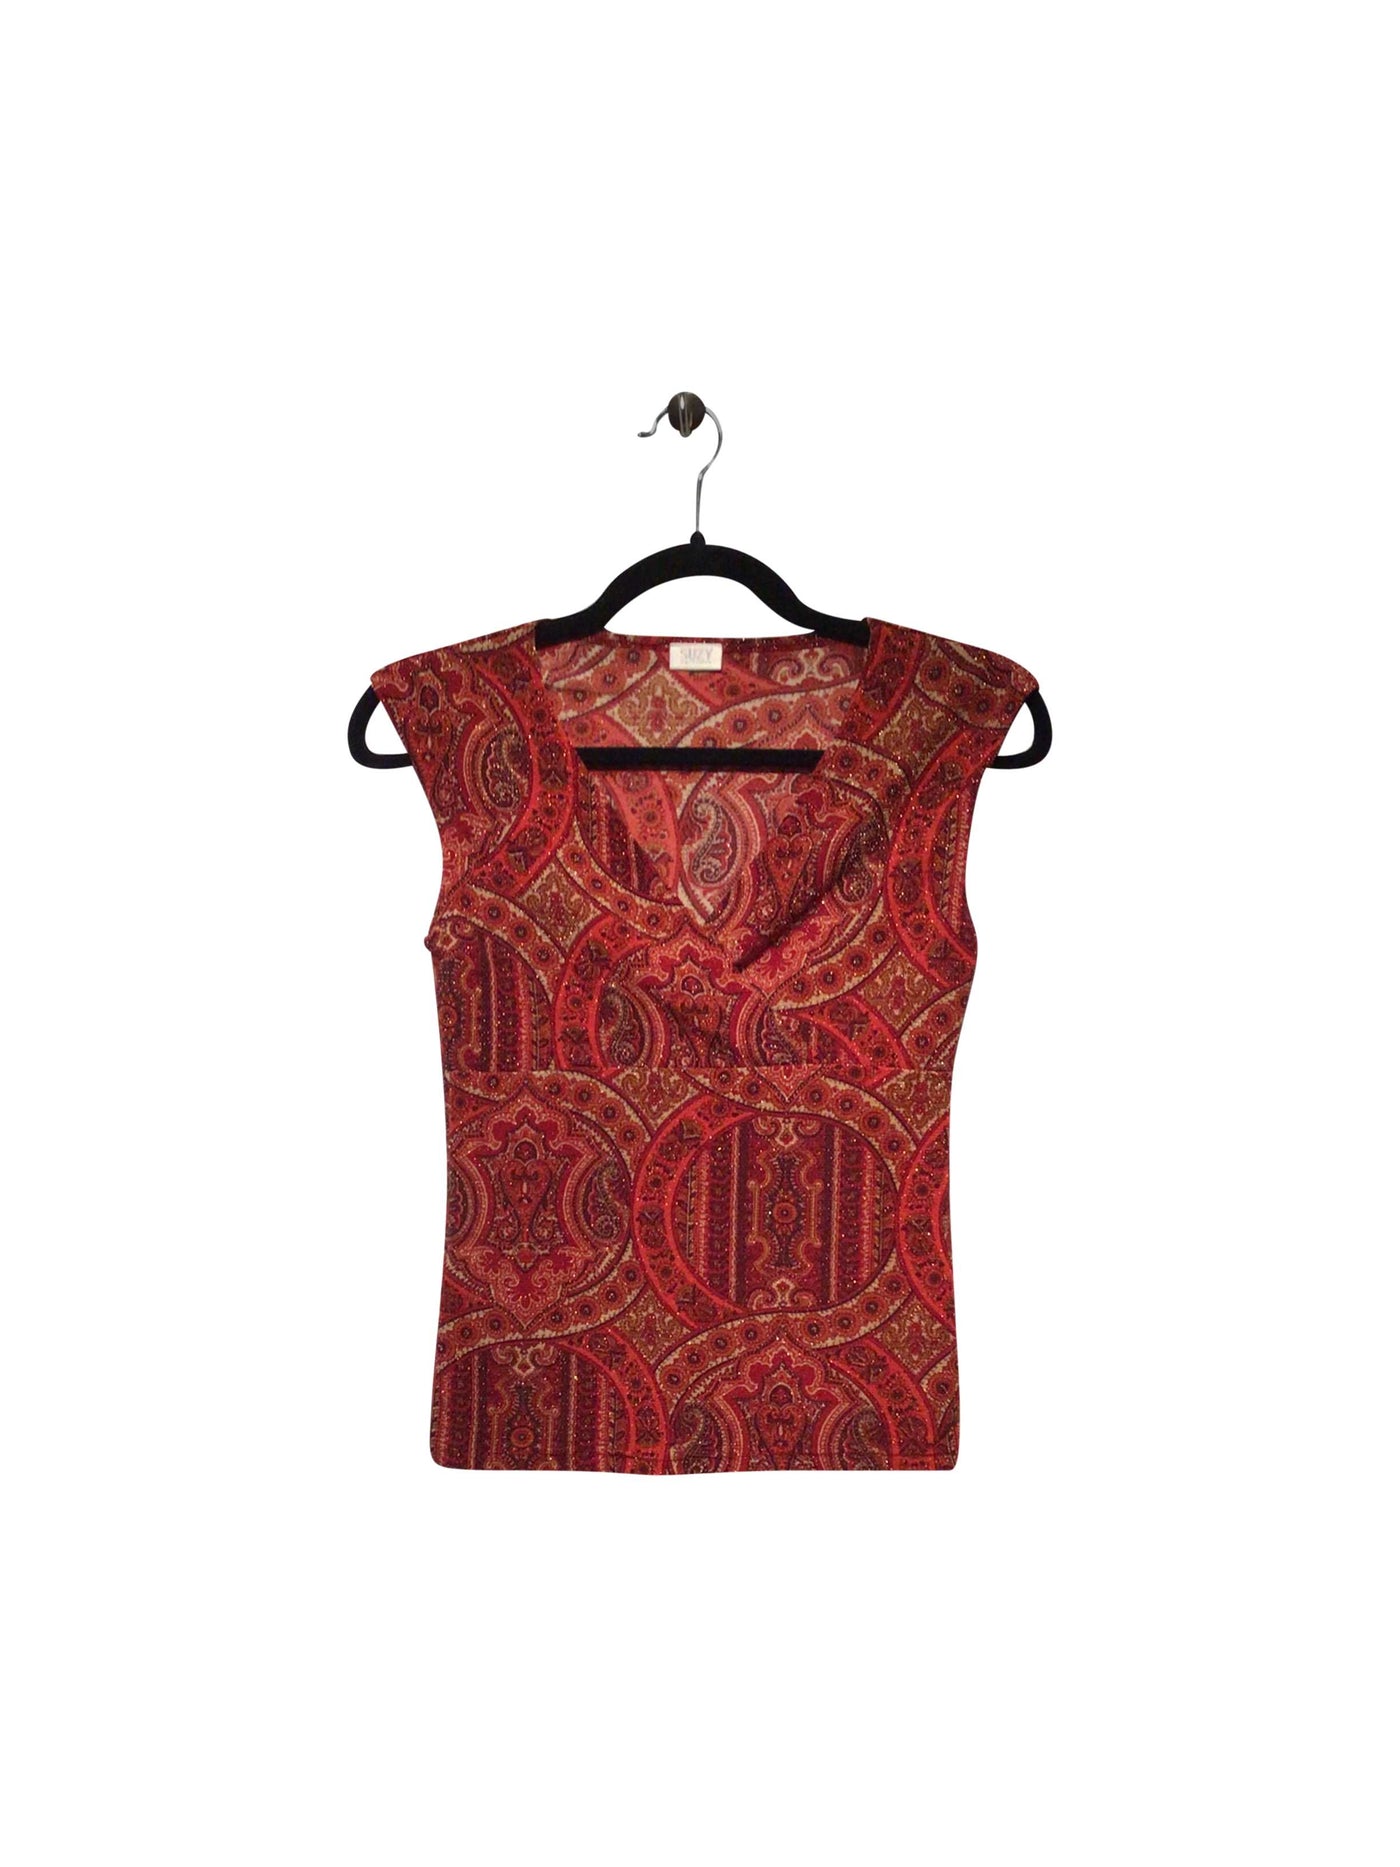 SUZY SHIER Regular fit Blouse in Red  -  XS  10.39 Koop